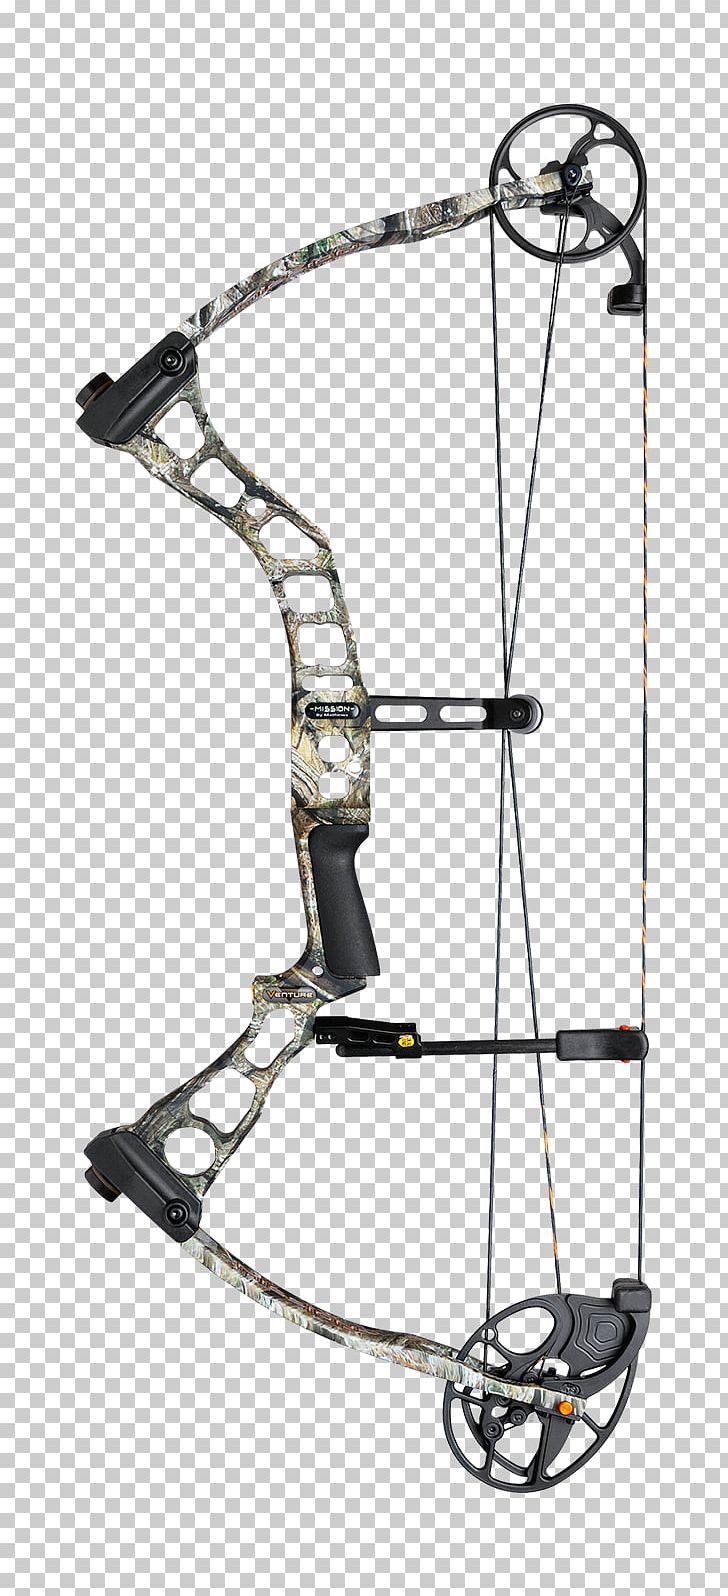 Bowhunting Archery Bow And Arrow Compound Bows PNG, Clipart, Archery, Arrow, Bow, Bow And Arrow, Bowhunting Free PNG Download